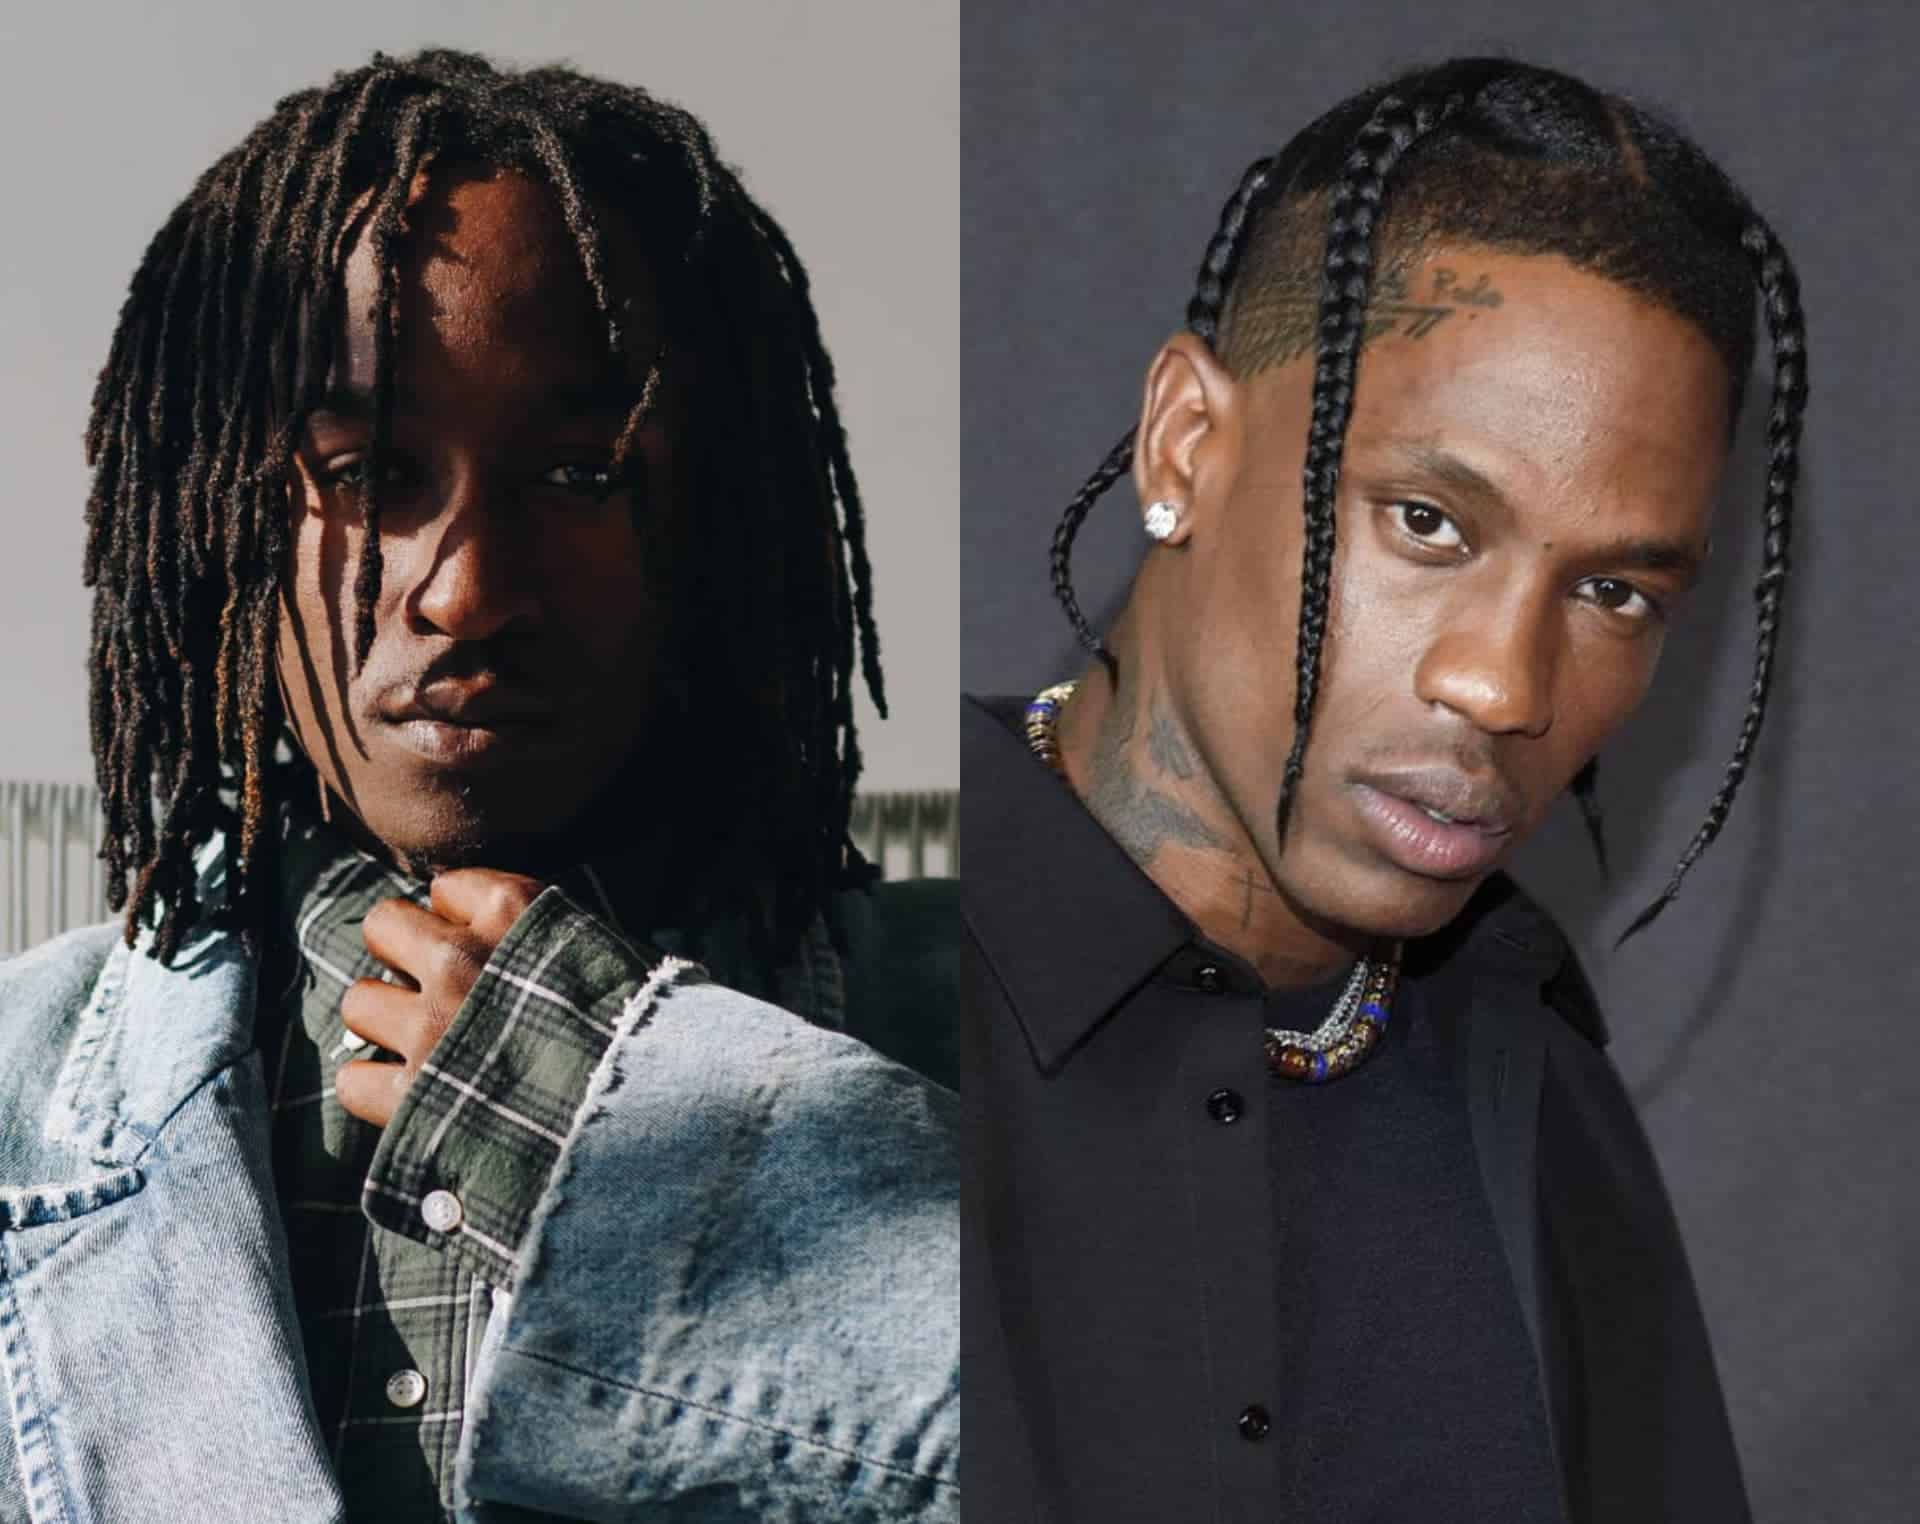 KayCyy Takes Shots At Travis Scott For Not Crediting Him On Utopia Album